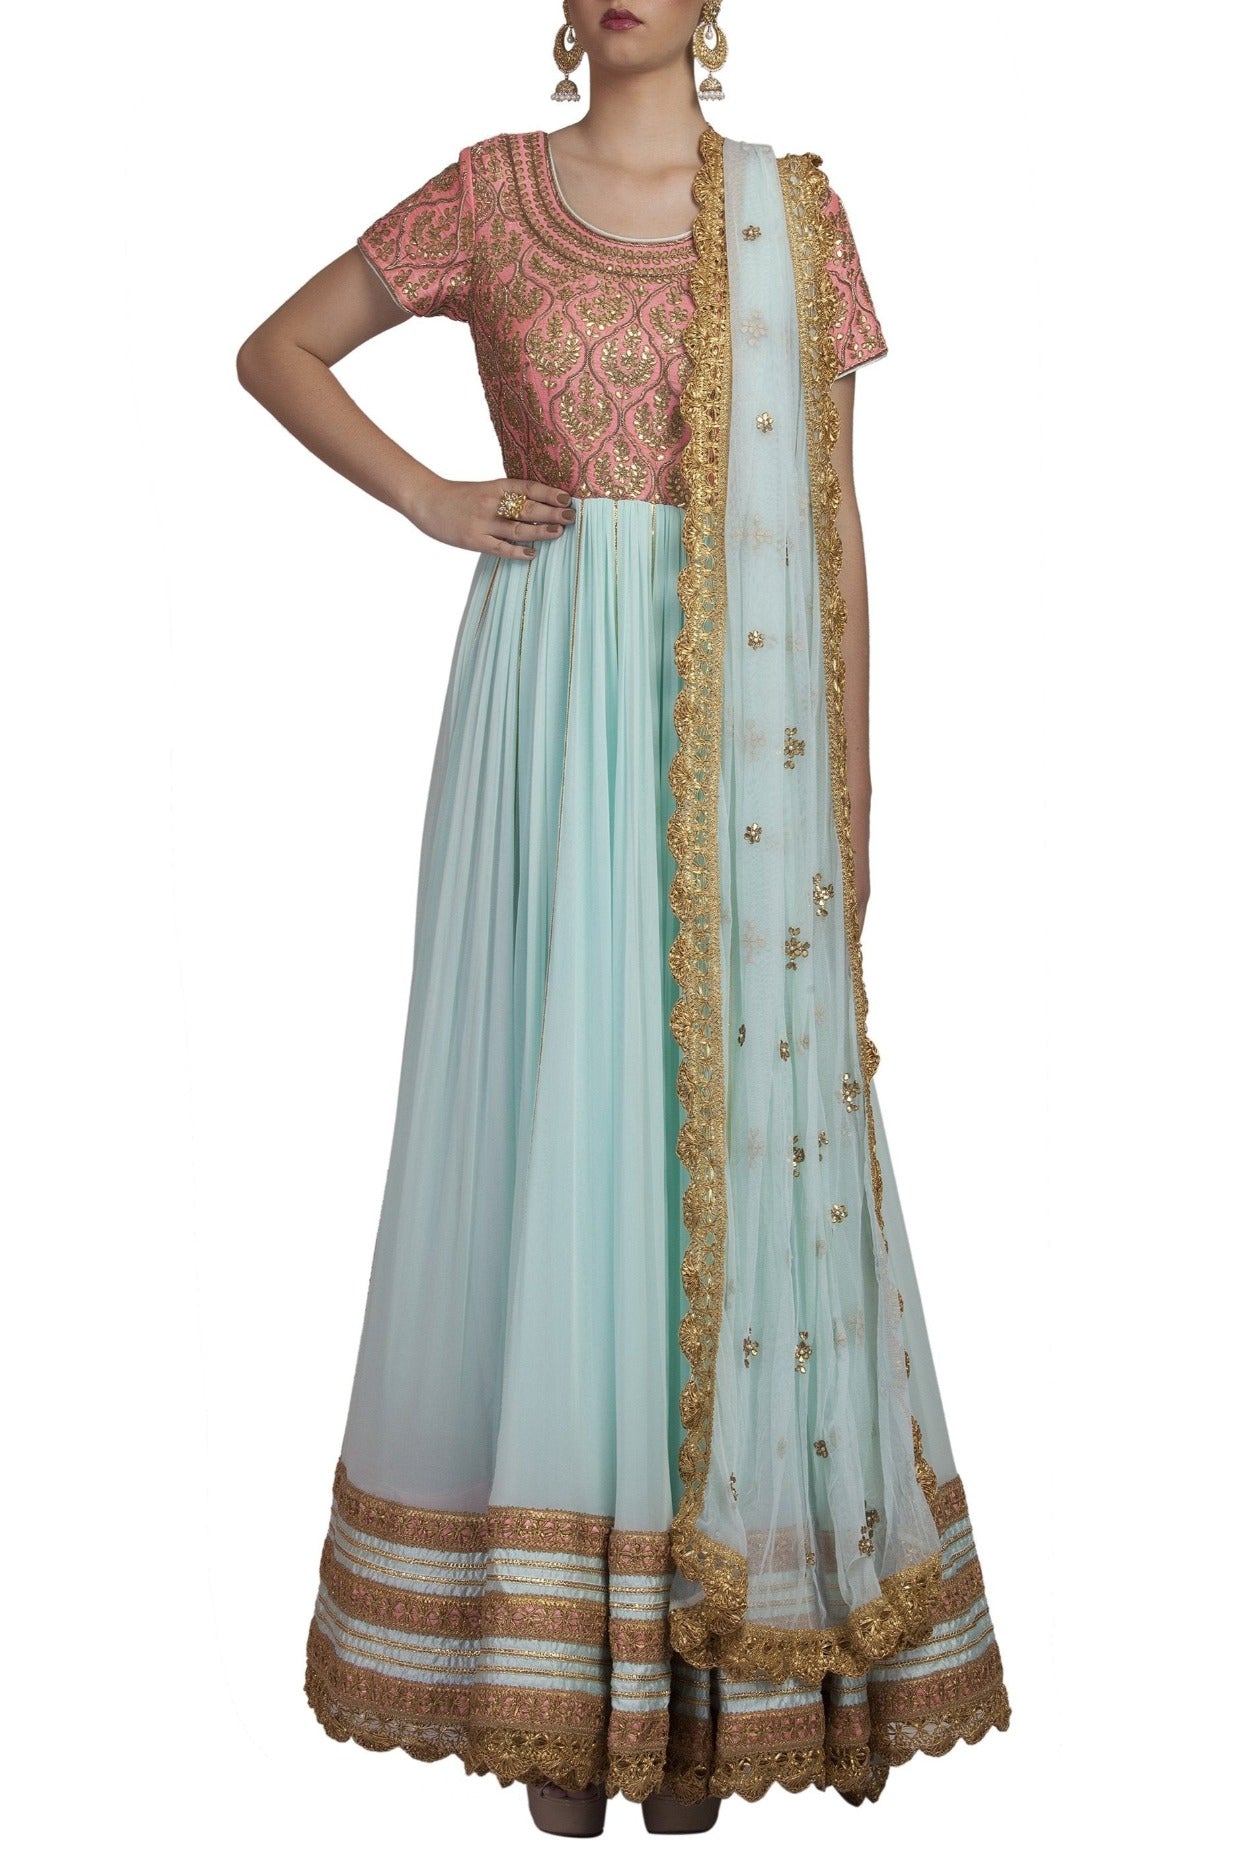 Blue and Pink Embroidered Anarkali